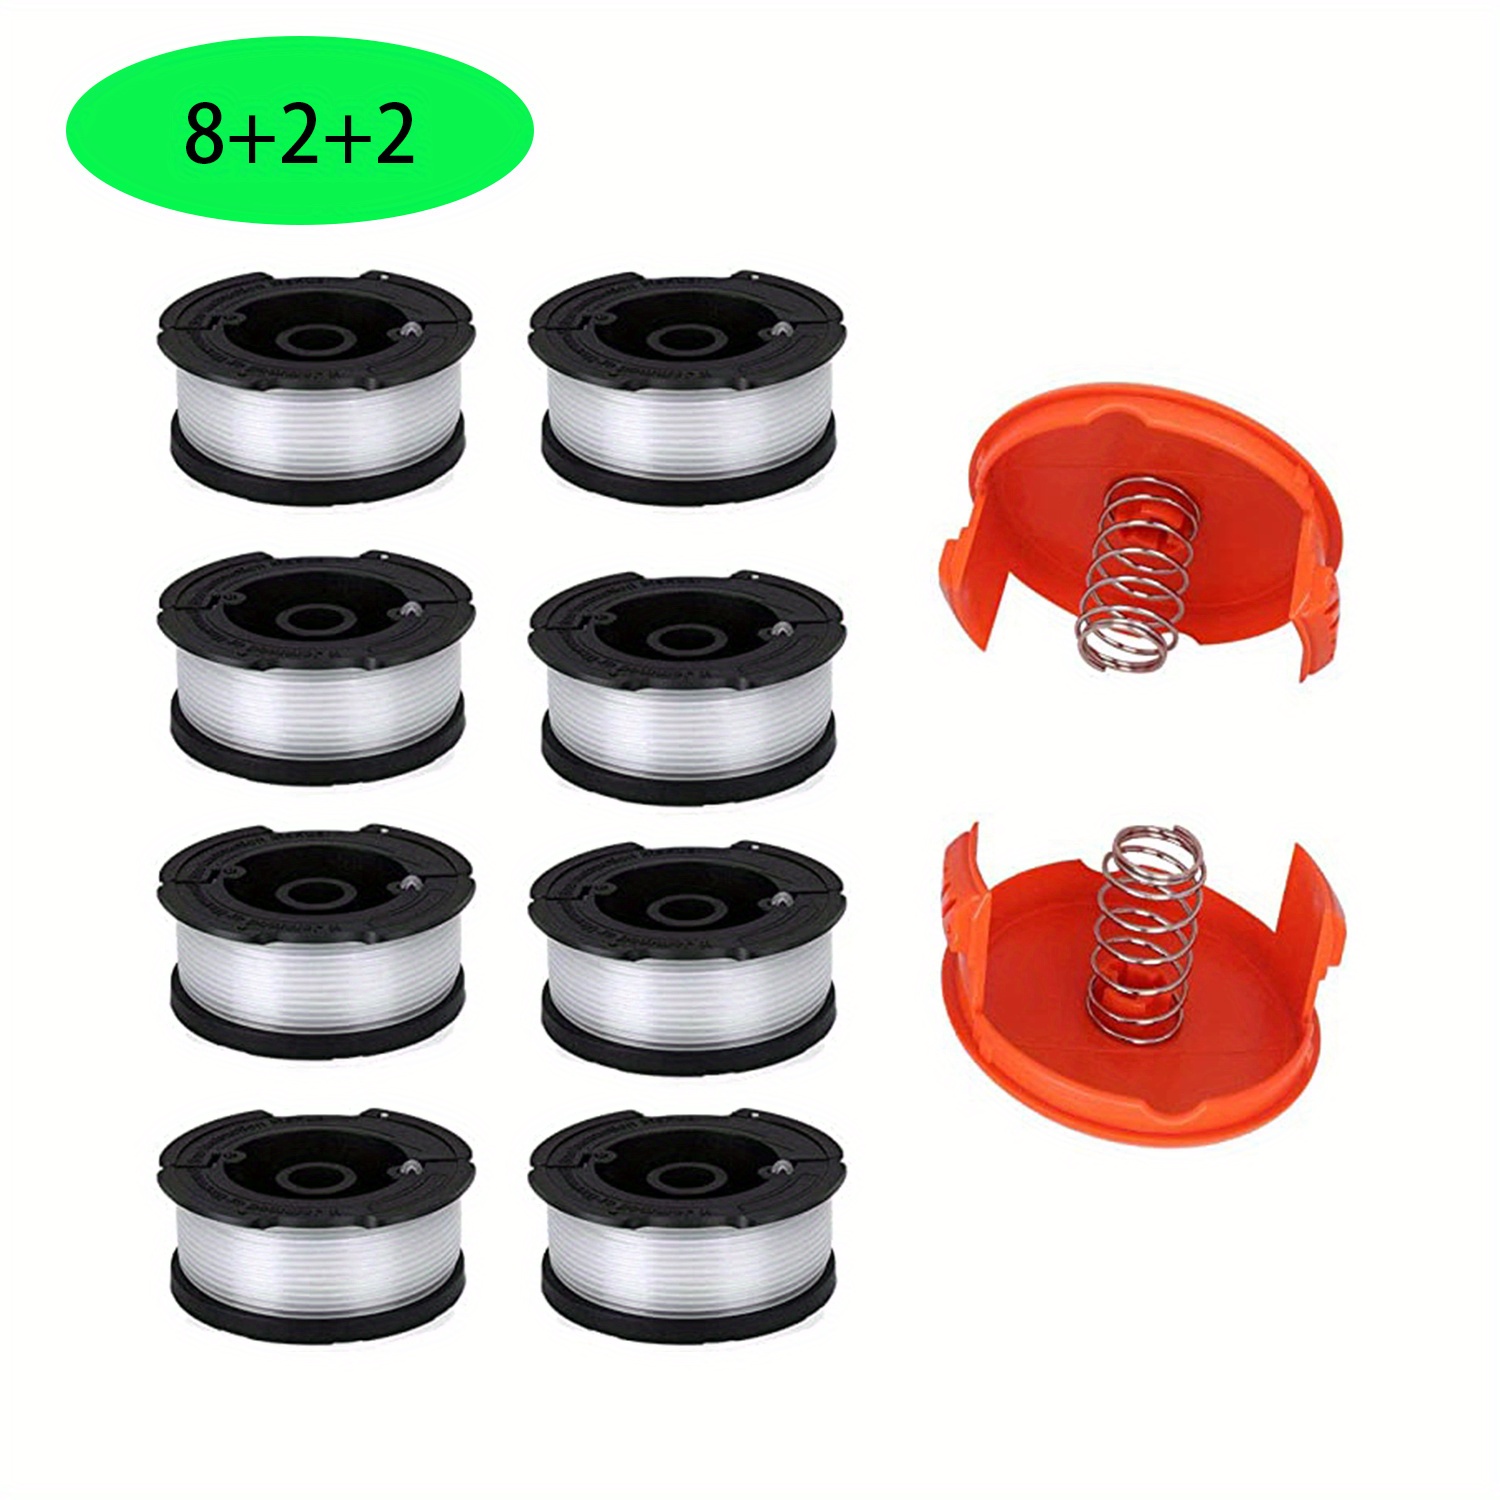 4 Spool Covers + 4 Springs) Replacement Spool Cap For Compatible With Black  Decker Gh900 Lst201 Gh600 Nst2018 Cst2000, Weed Eater Wacker Cap Cover